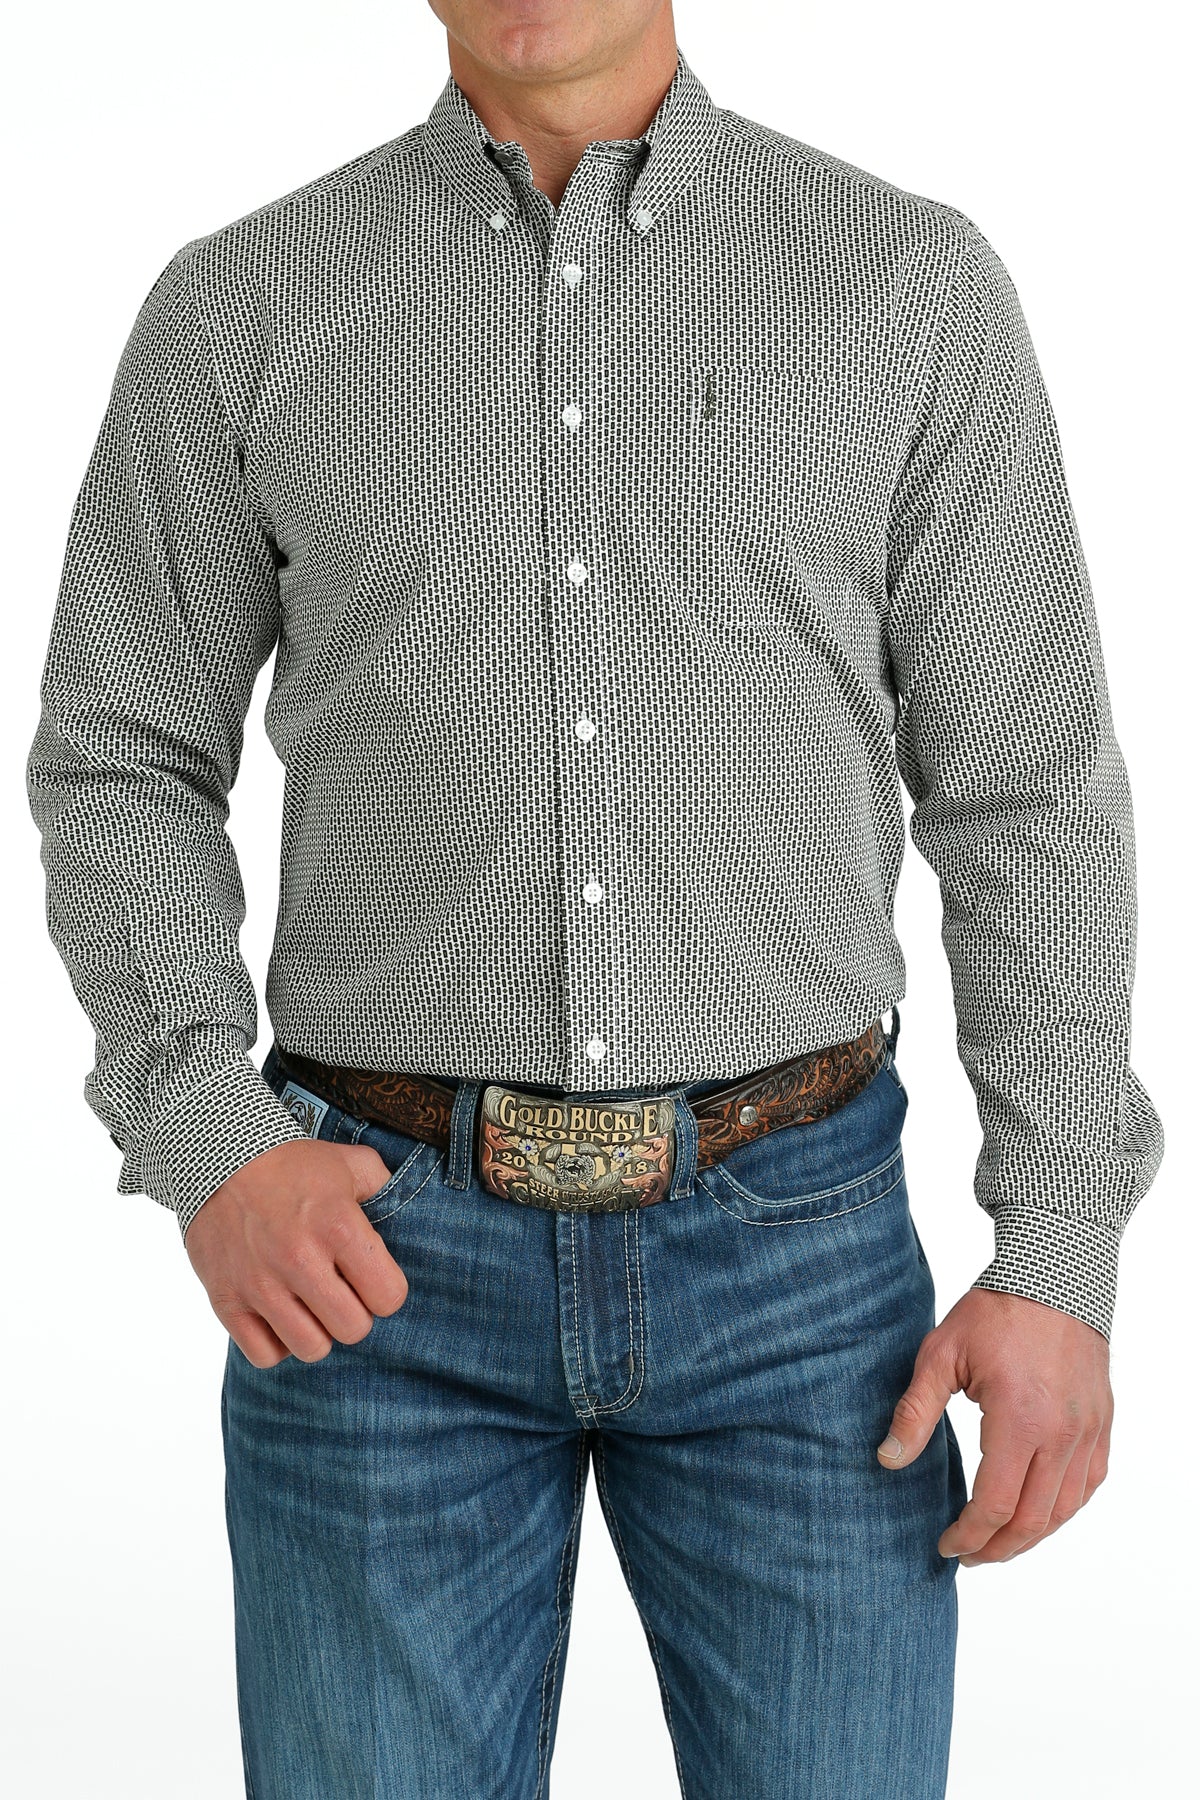 Cinch Men's Modern Fit White with Olive & Black Geometric Western Button Down Shirt